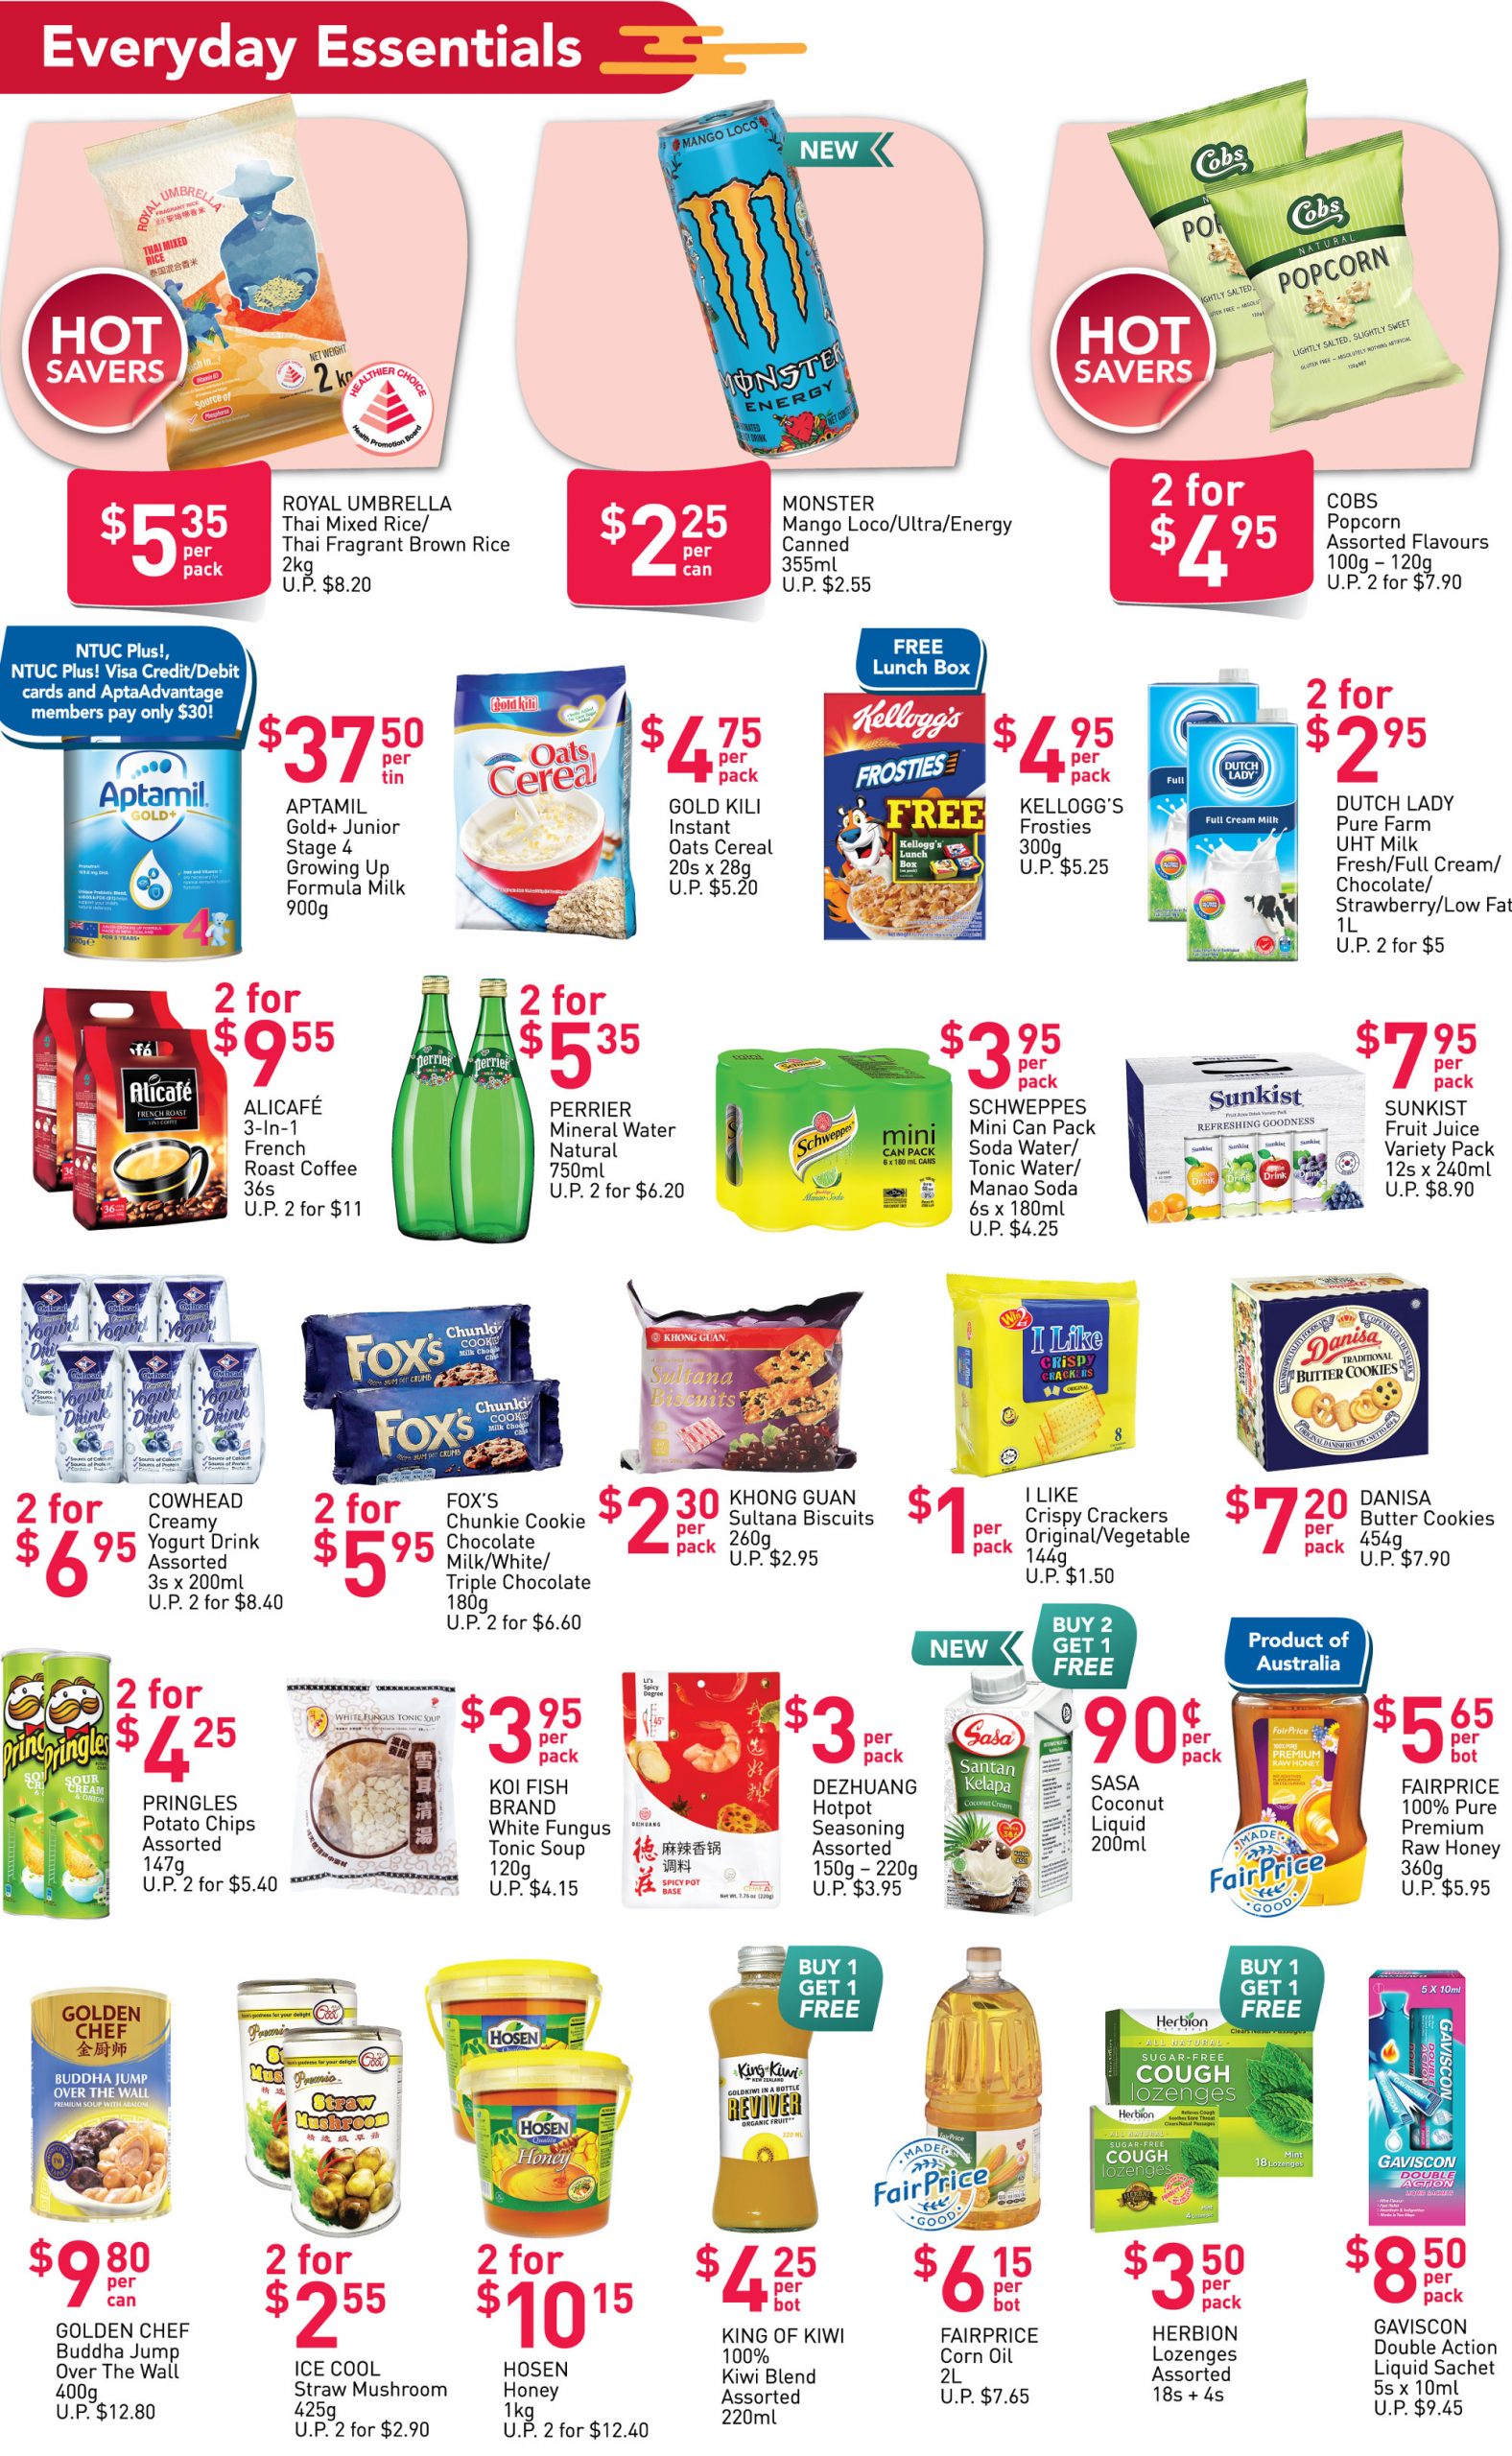 FairPrice’s weekly saver deals till 24 February 2021 (1)